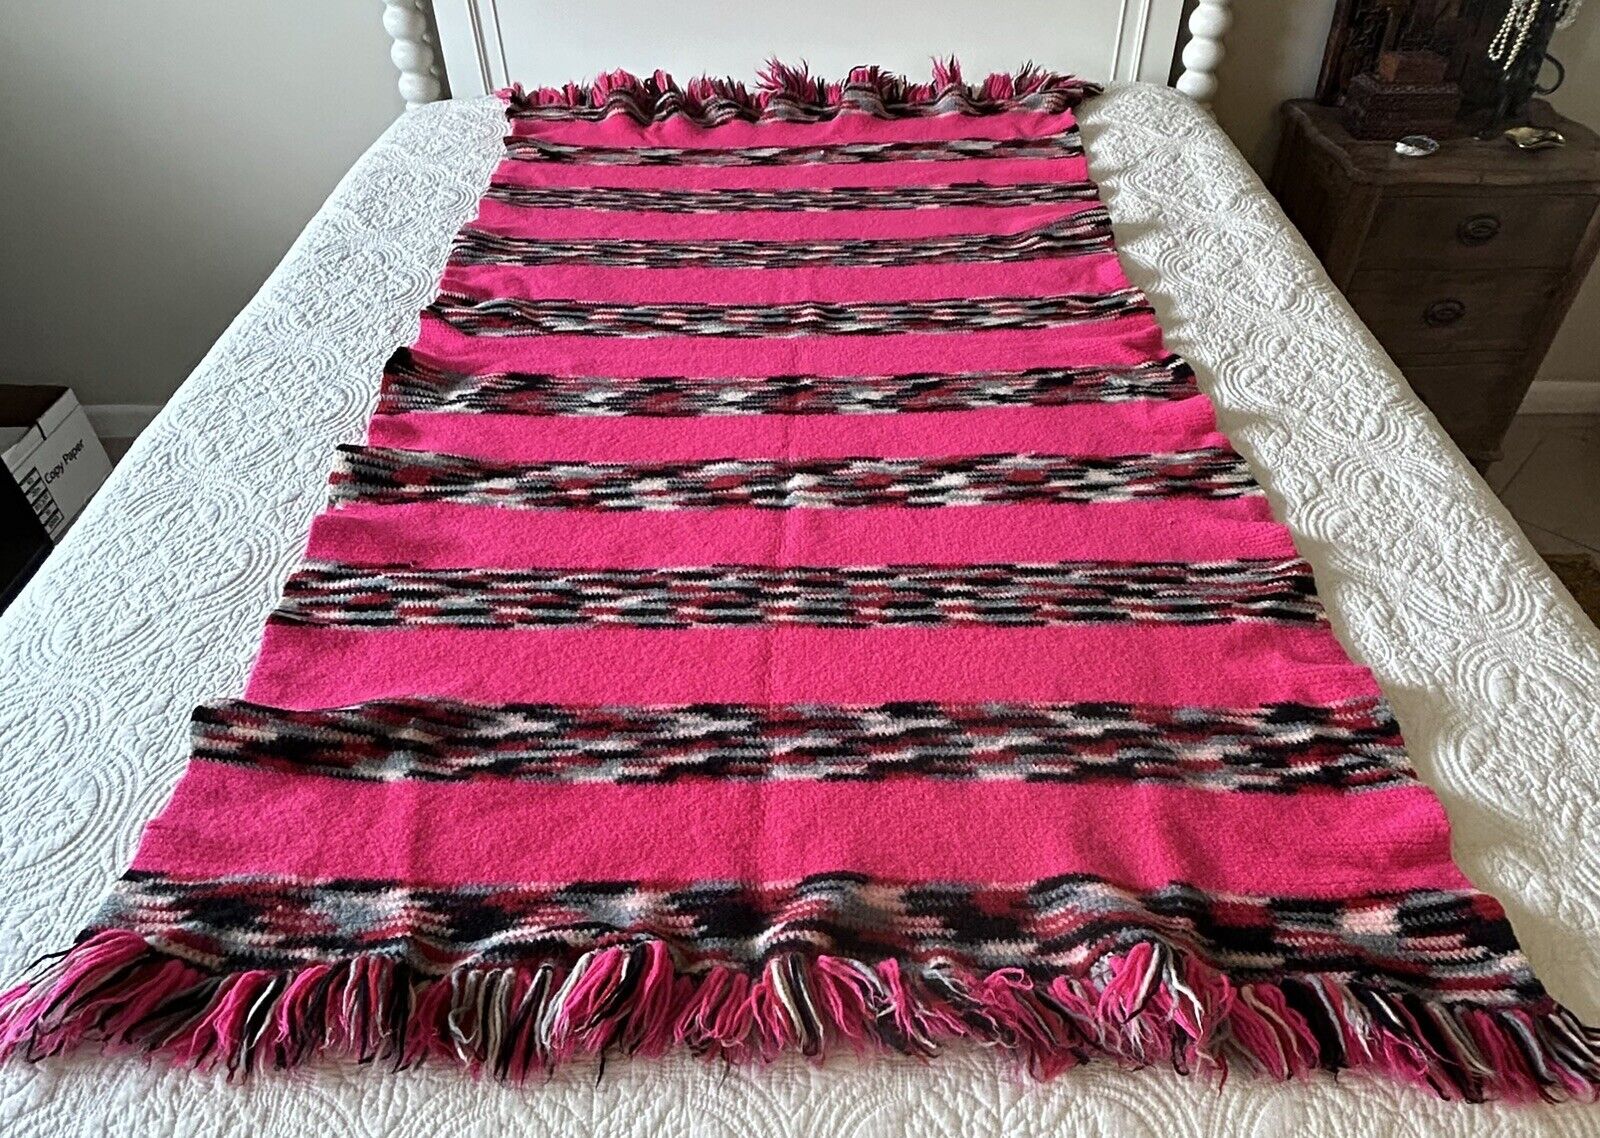 Vintage Hand Knit Crochet Throw Or Wrap 37x71 Wool? With Fringe